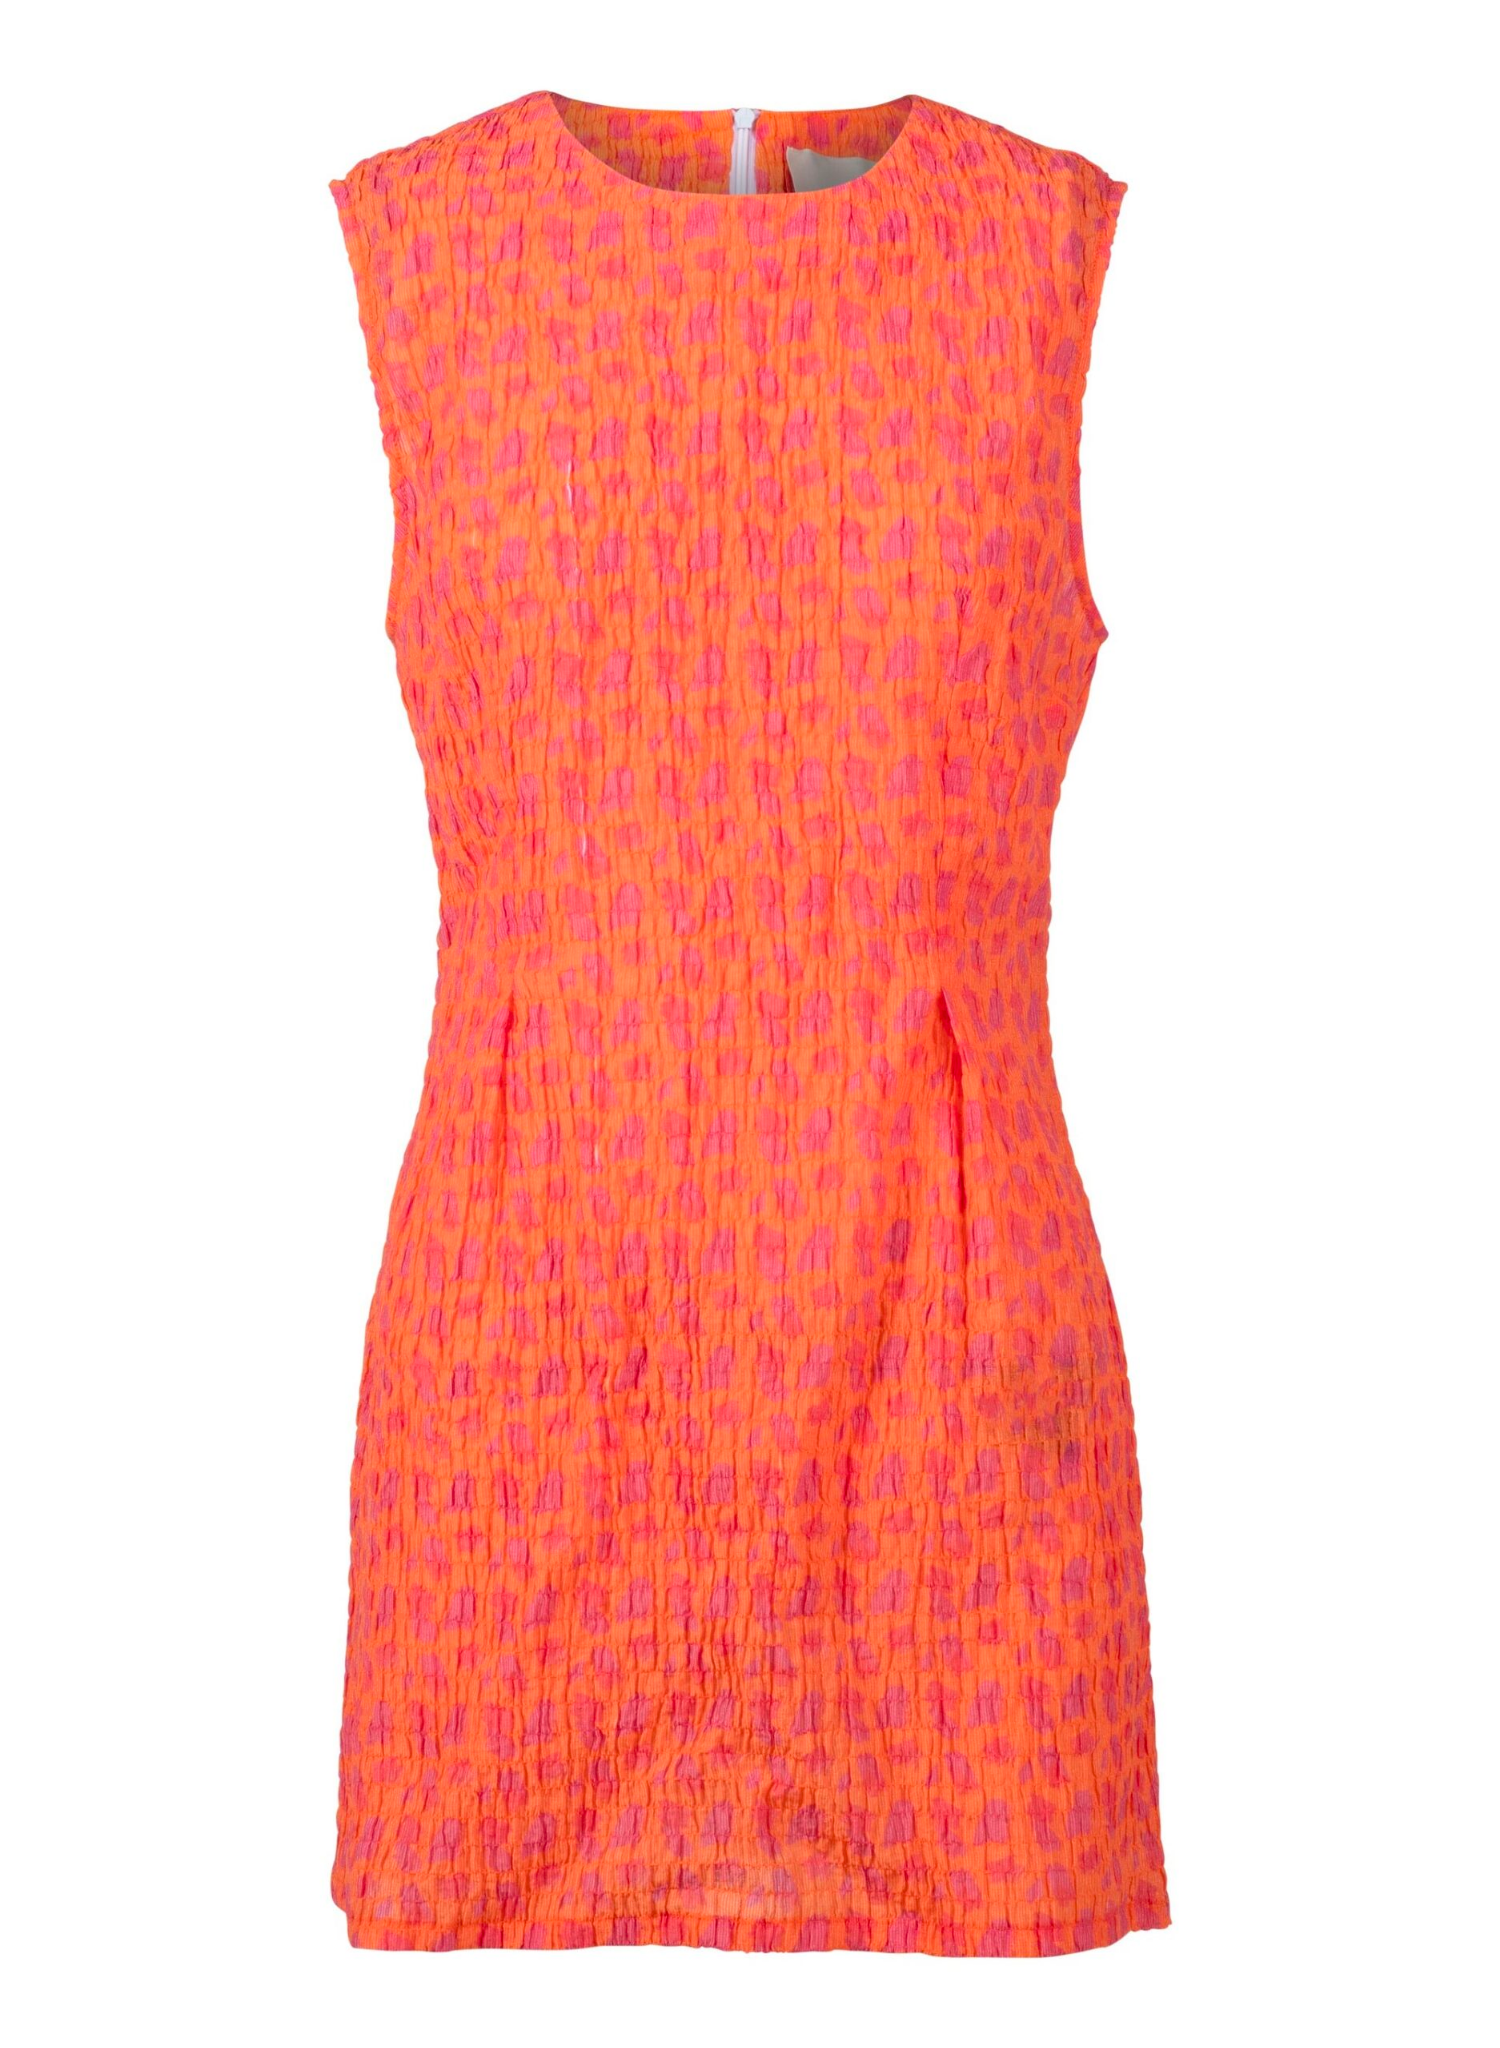 Reminiscent of a 60s style mini-dress, this classic style receives an update with textural fabrication, acid bright leopard print pattern & tailored darts designed for an embracing fit.